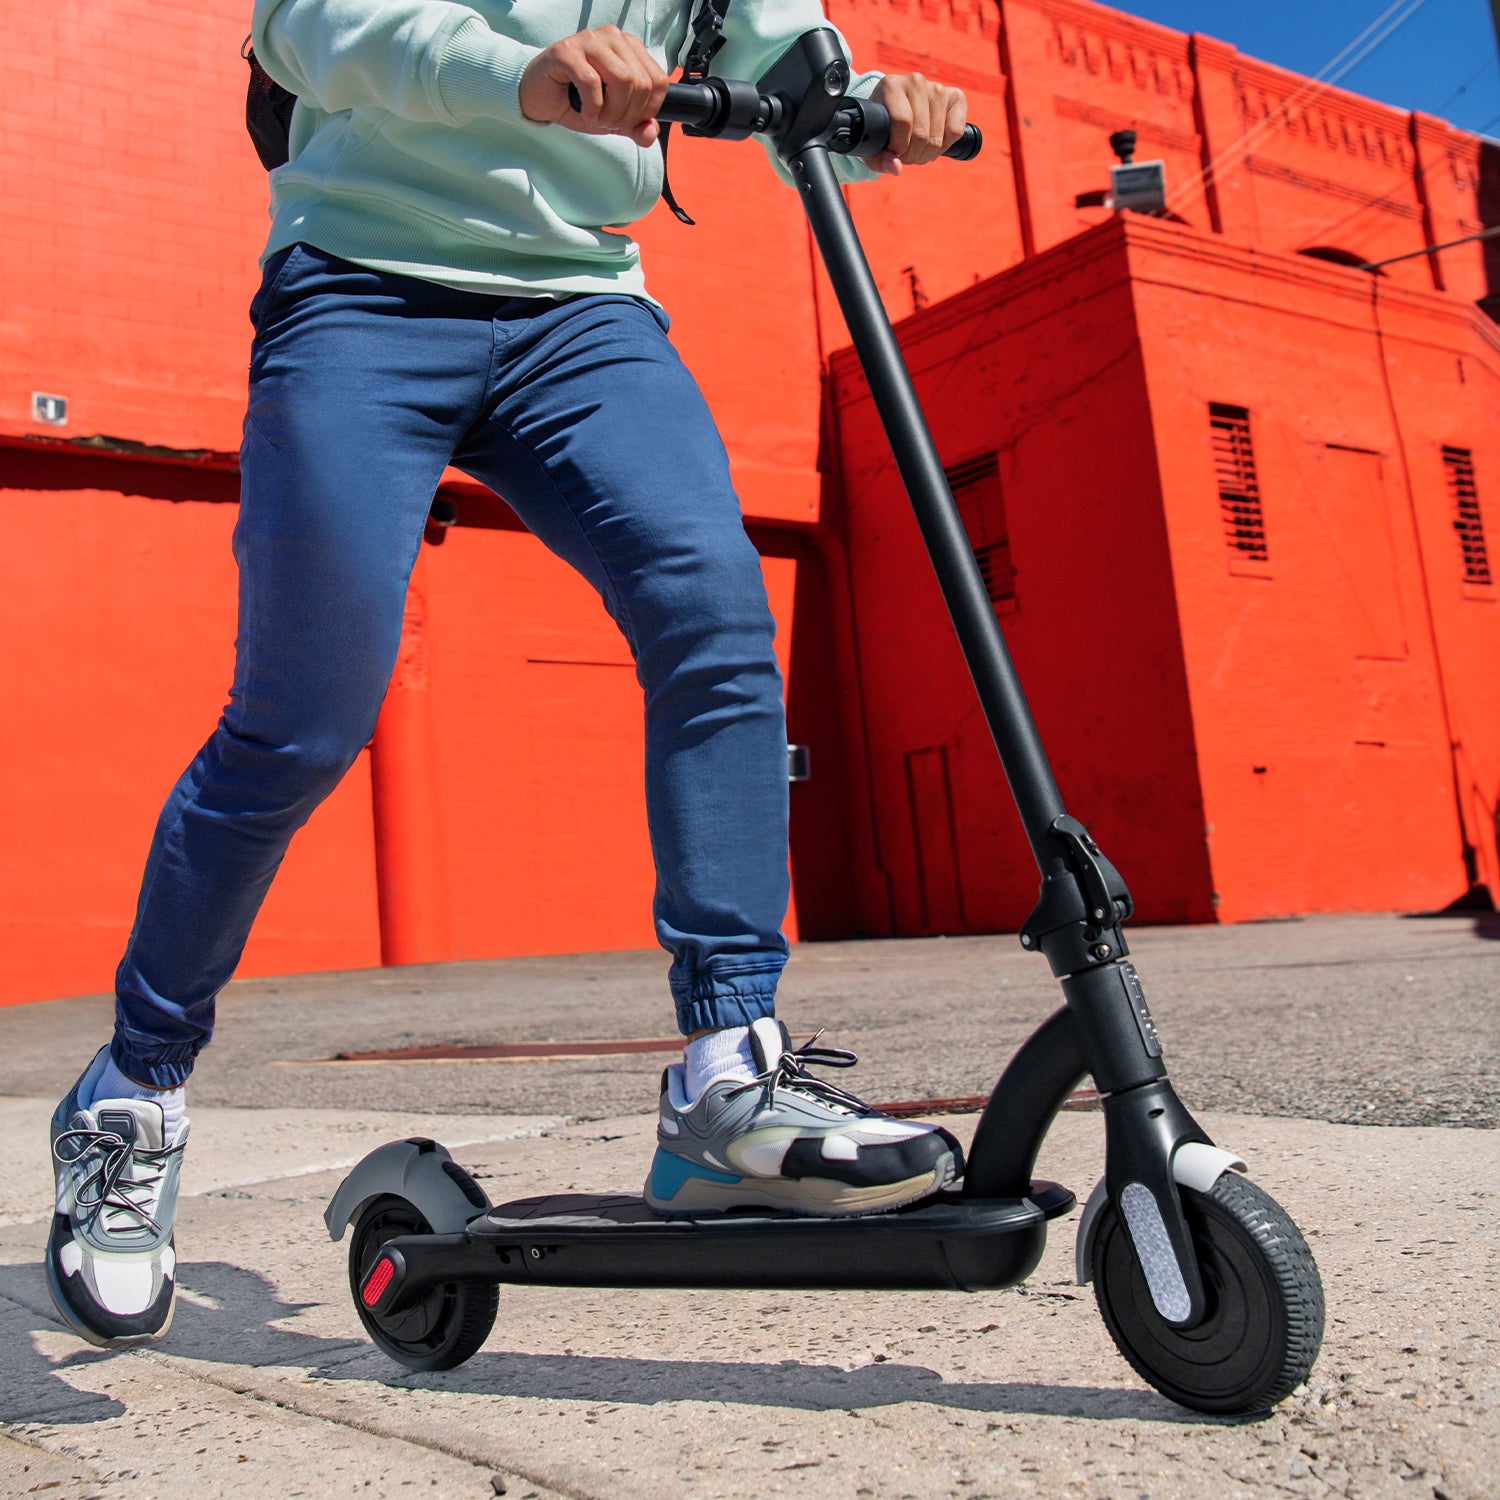 person kicking off to gain momentum on the Ora Pro e-scooter